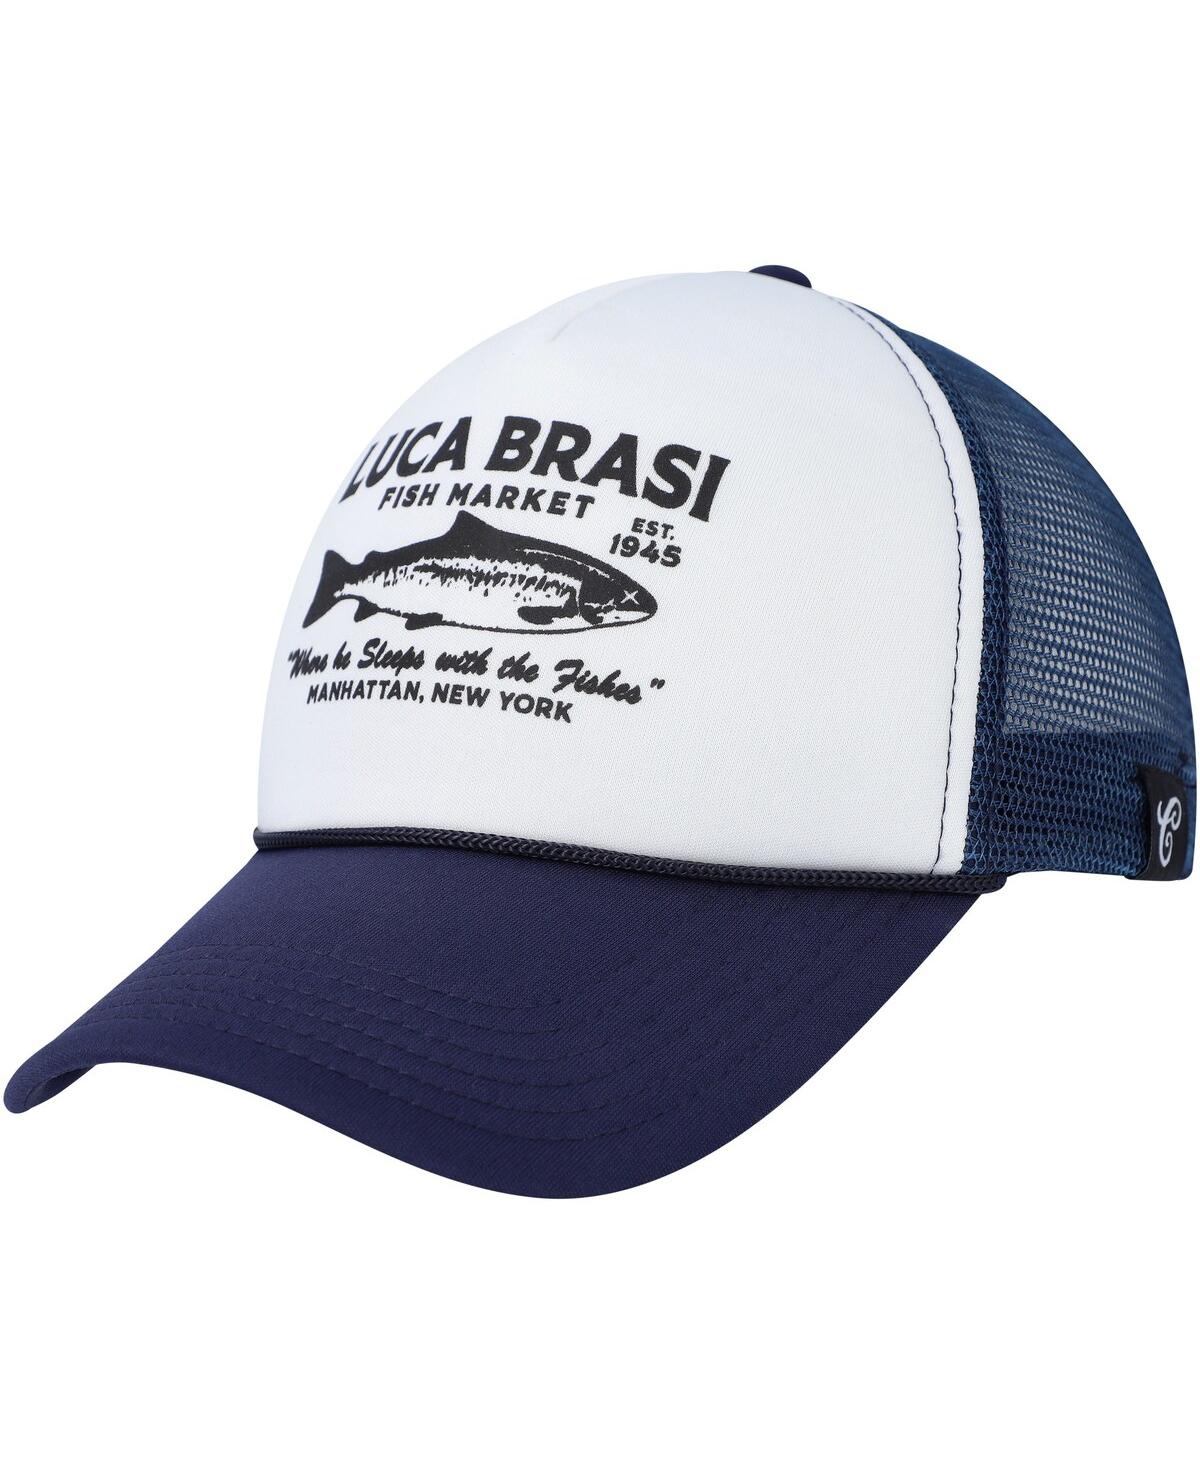 Men's and Women's Contenders Clothing White, Navy The Godfather Luca Brasi Fish Market Snapback Hat - White, Navy